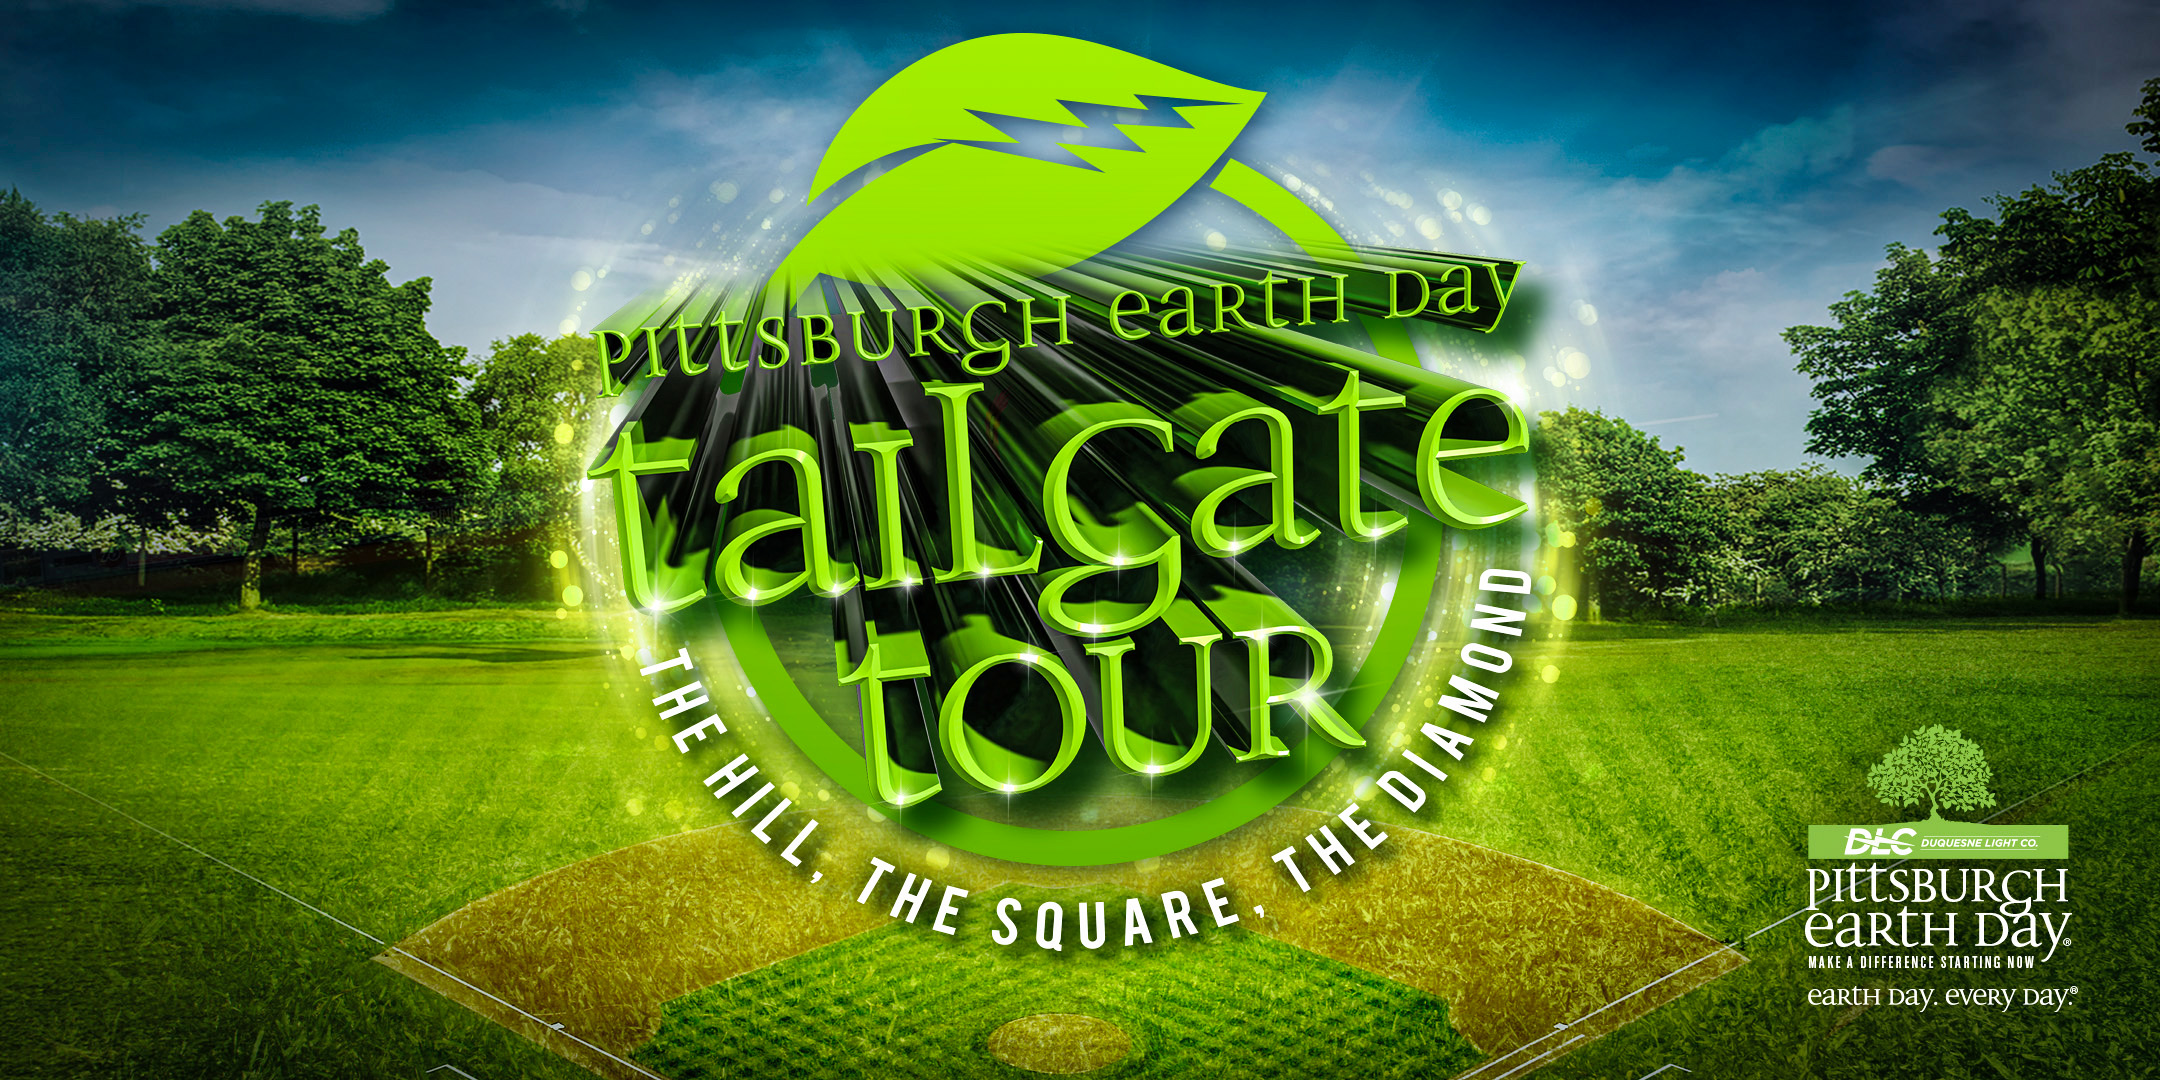 Pittsburgh Earth Day Tailgate Tour